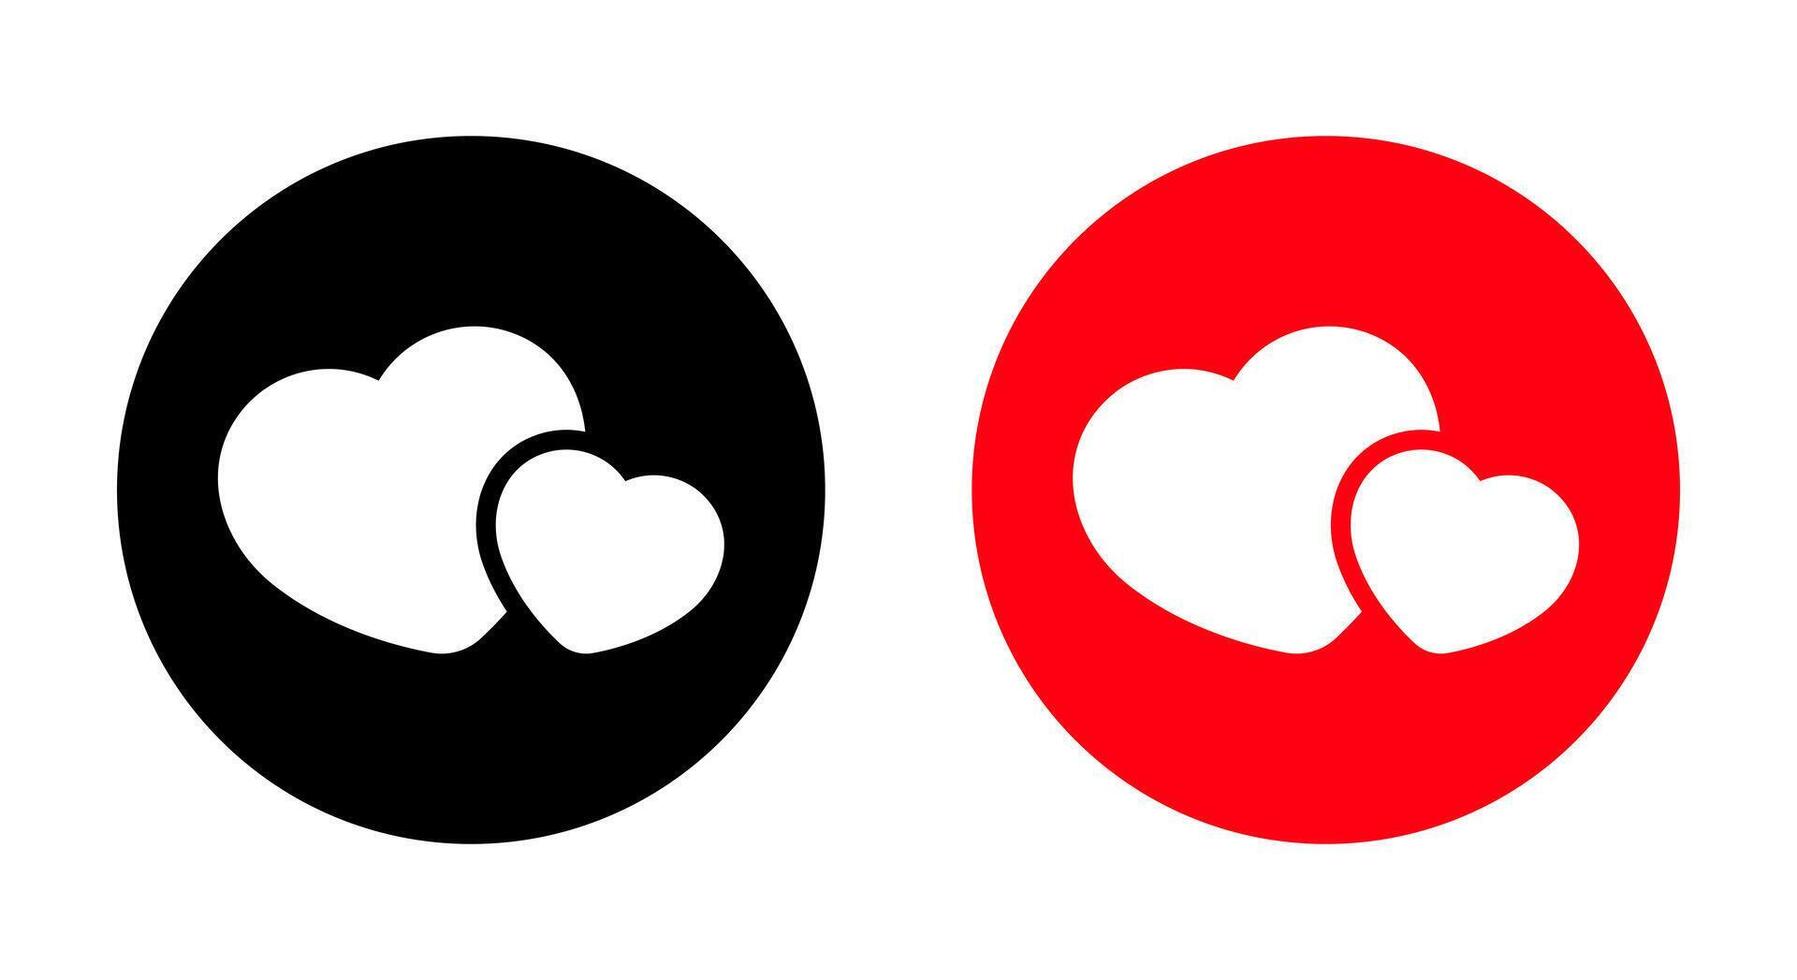 Double heart icon vector on circle background. Two love sign symbol